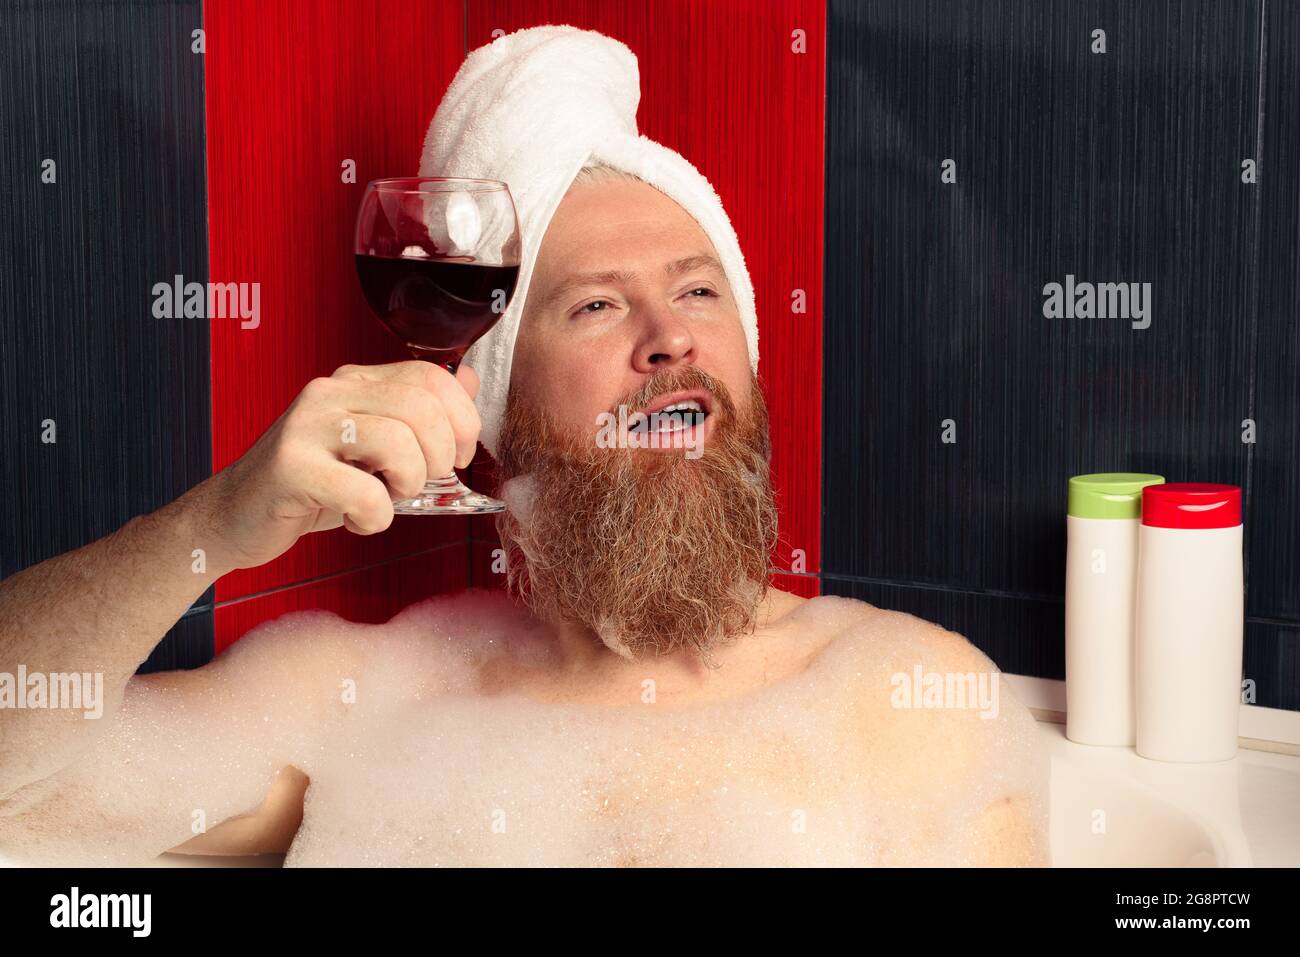 Funny Picture of a Man Taking a Relaxing Bath. Close-up of Male